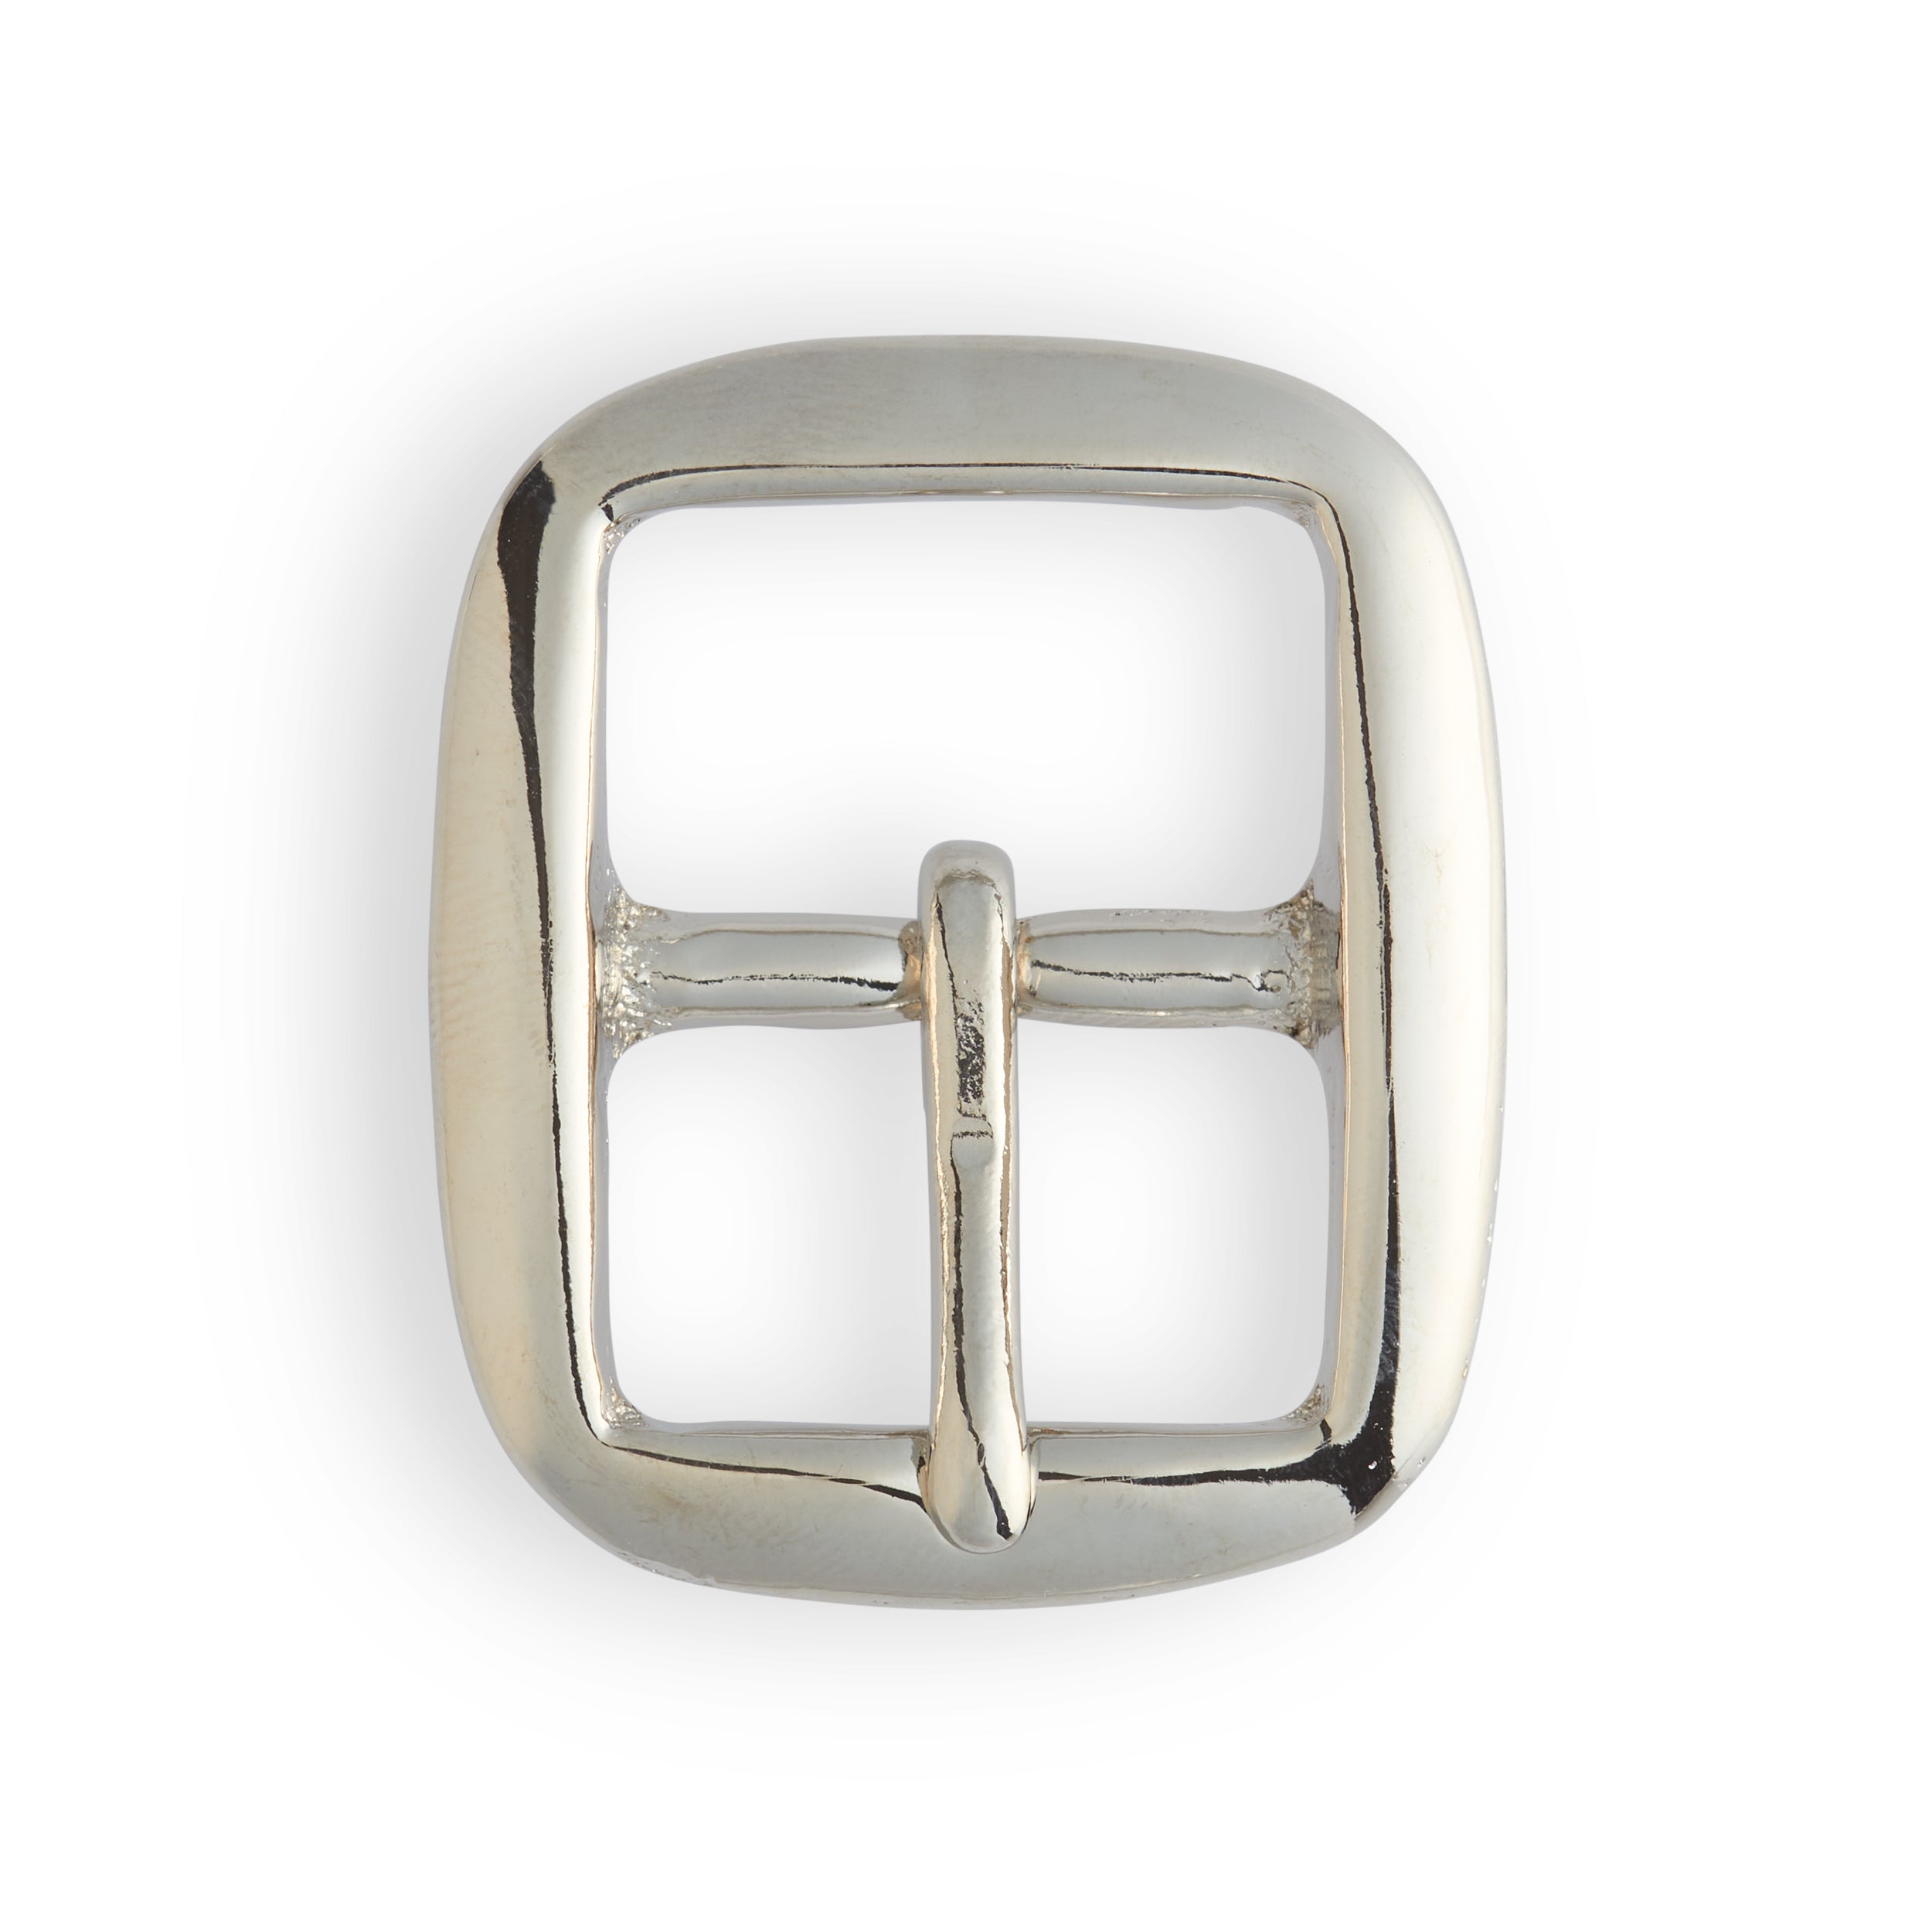 Square Round Bridle Buckle